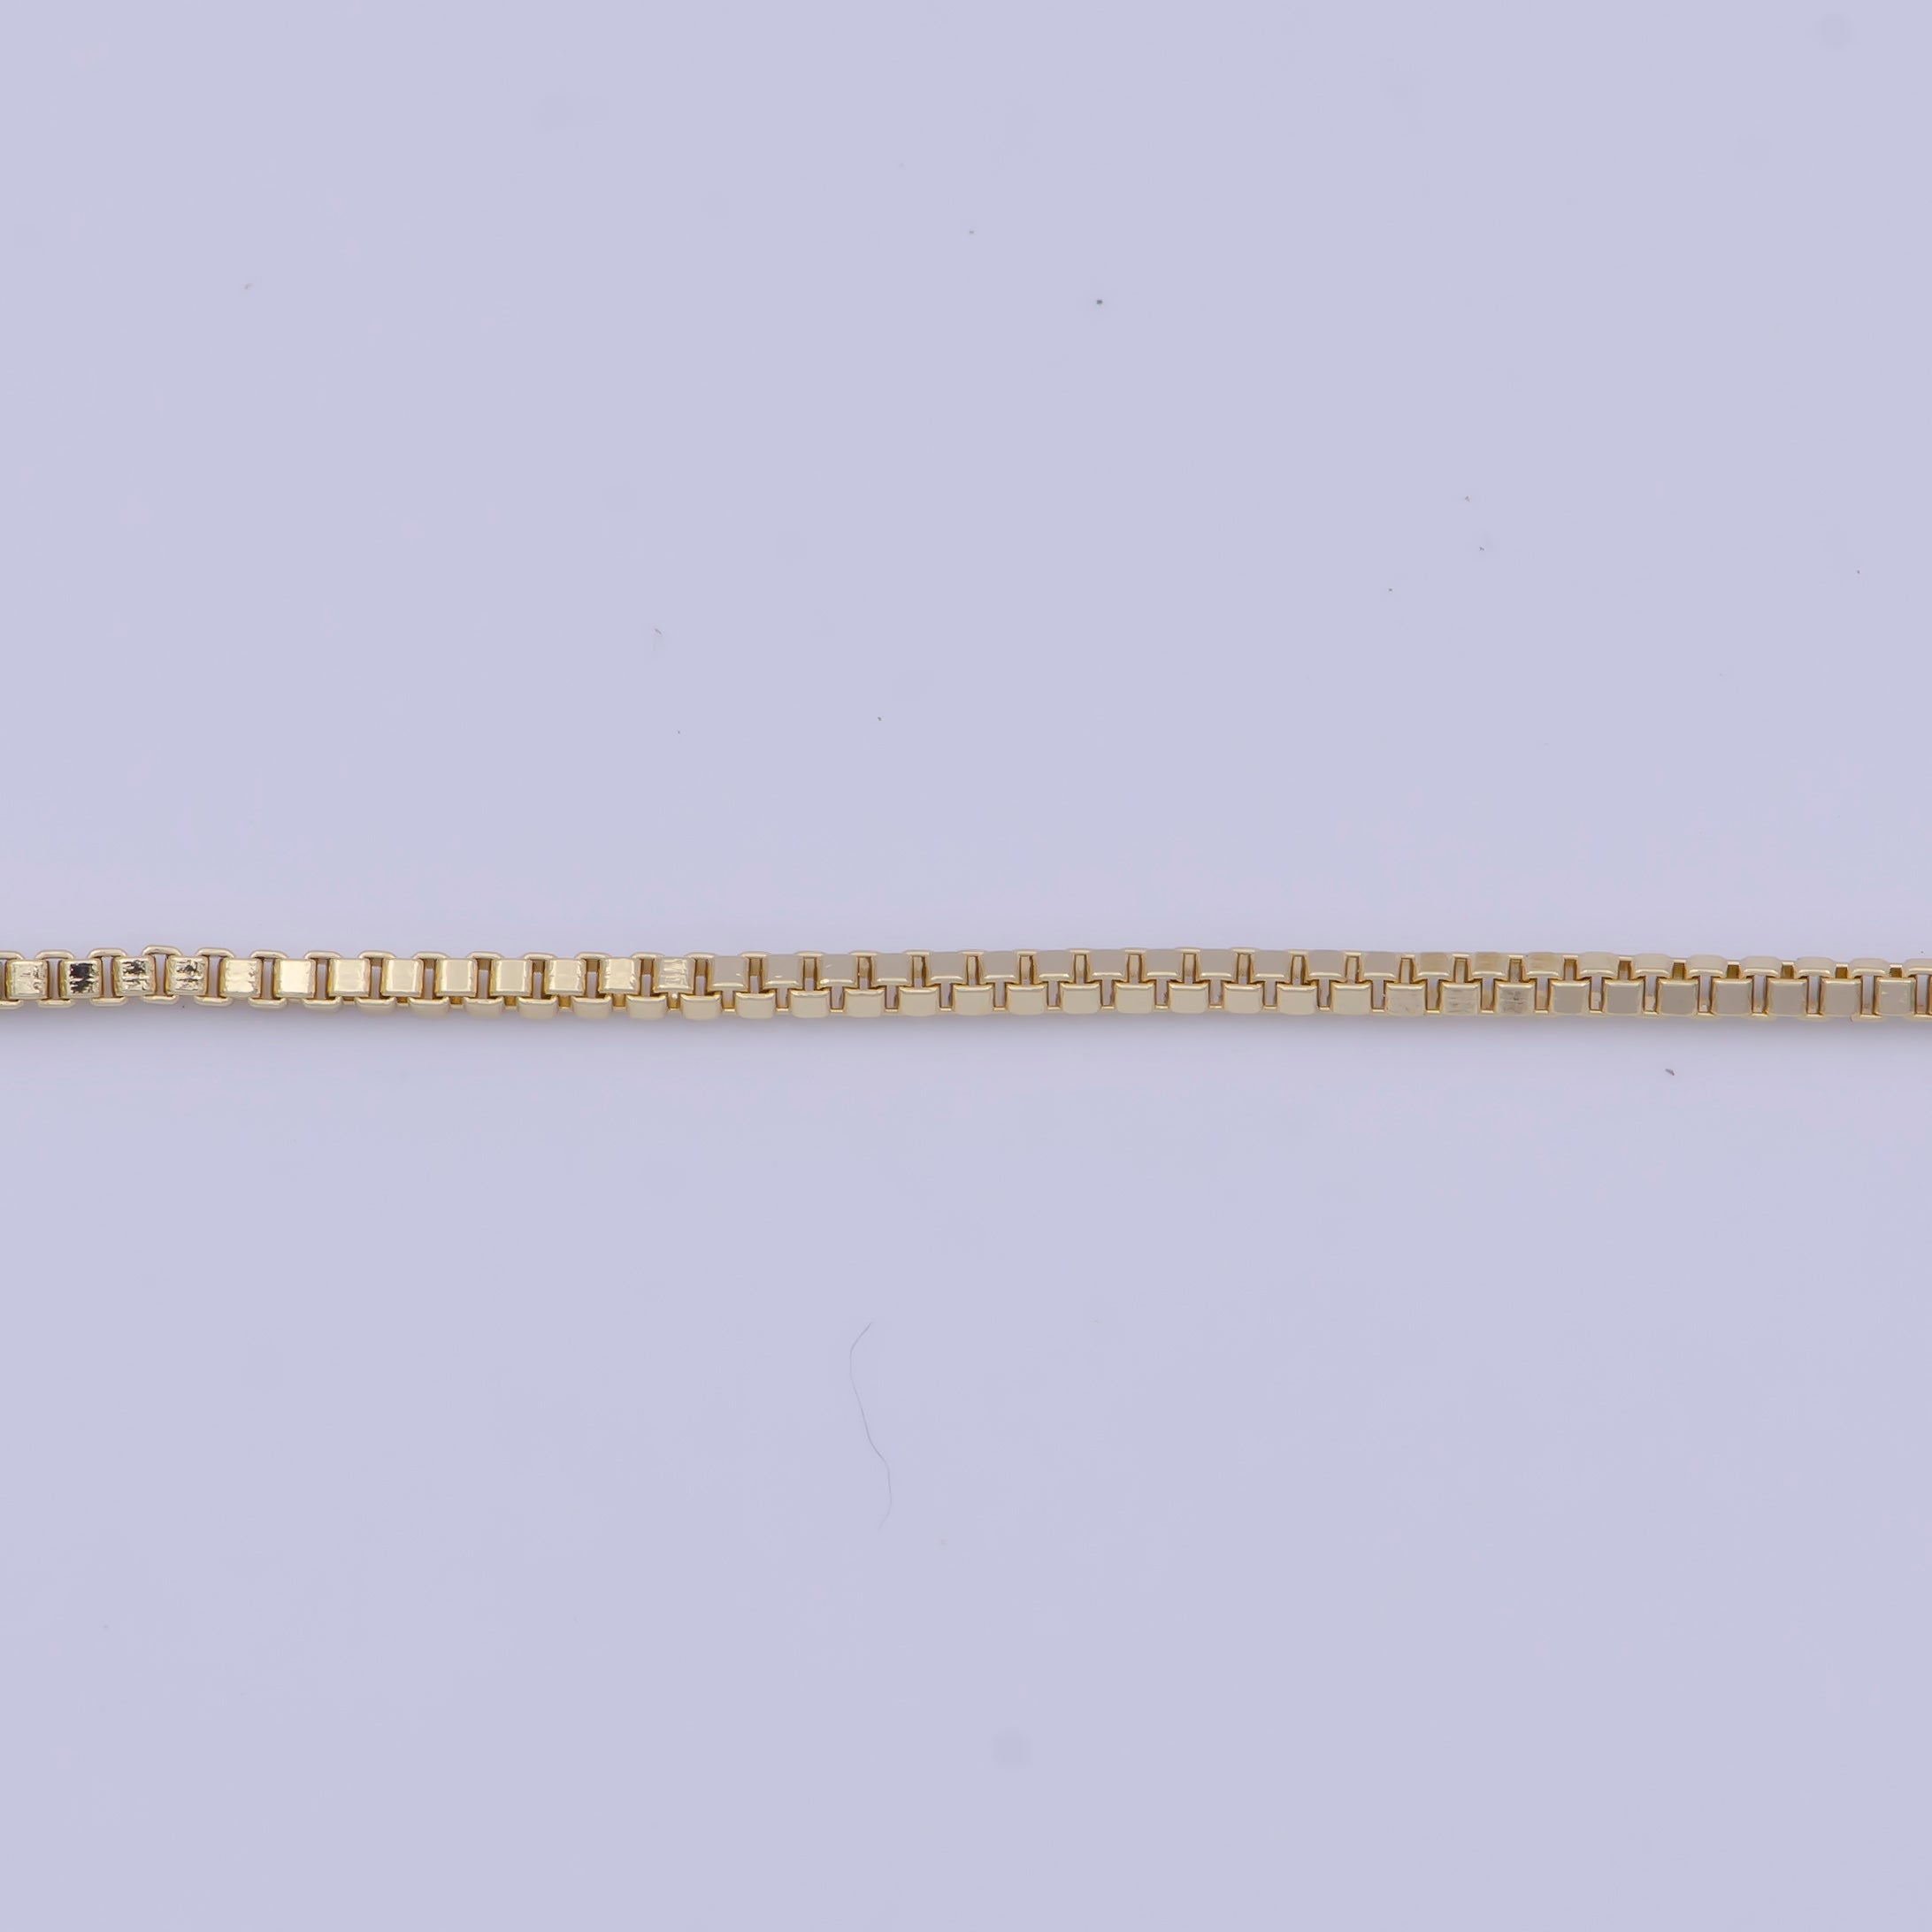 Dainty Box Chain 14k Gold Filled Box Chain, Everyday Jewelry, Essential Layering Chain Ready To wear Necklace WA-1111 - DLUXCA